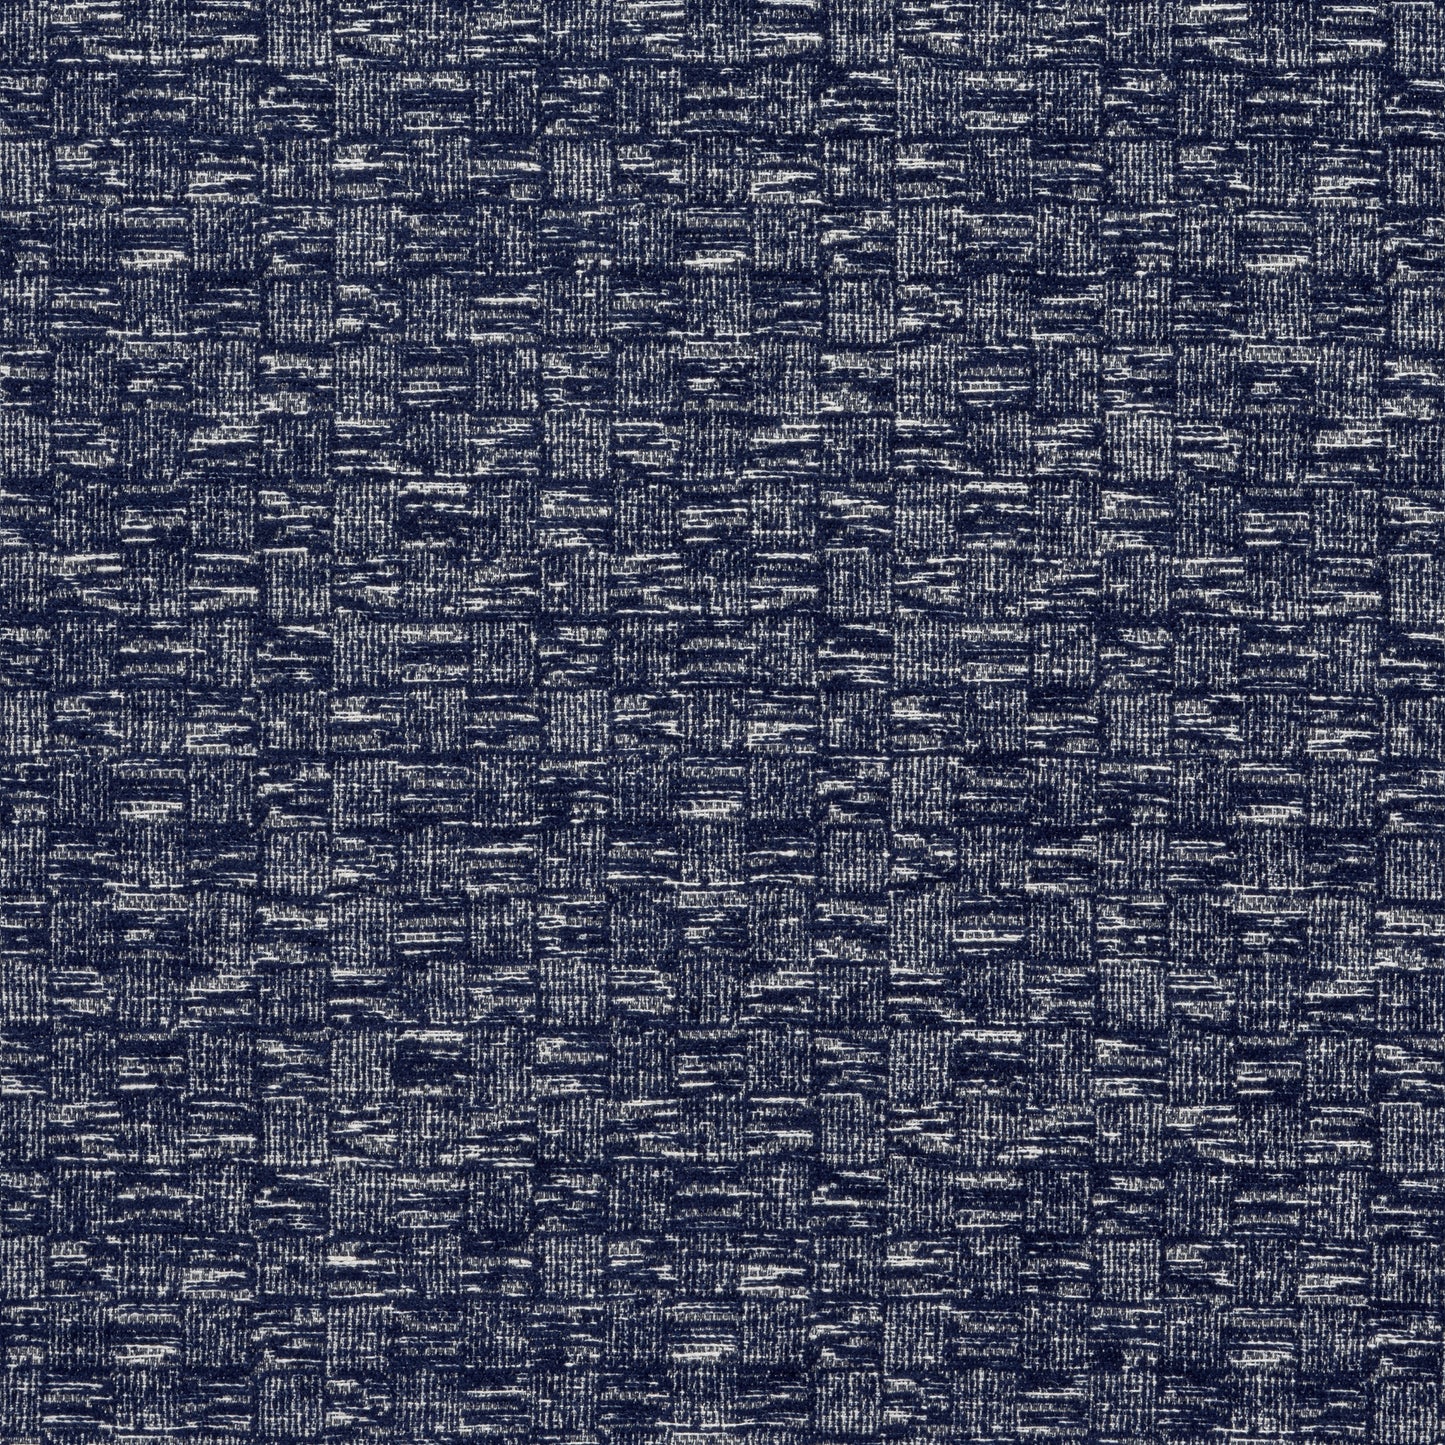 Purchase Thibaut Fabric SKU W8522 pattern name Cestino color Navy